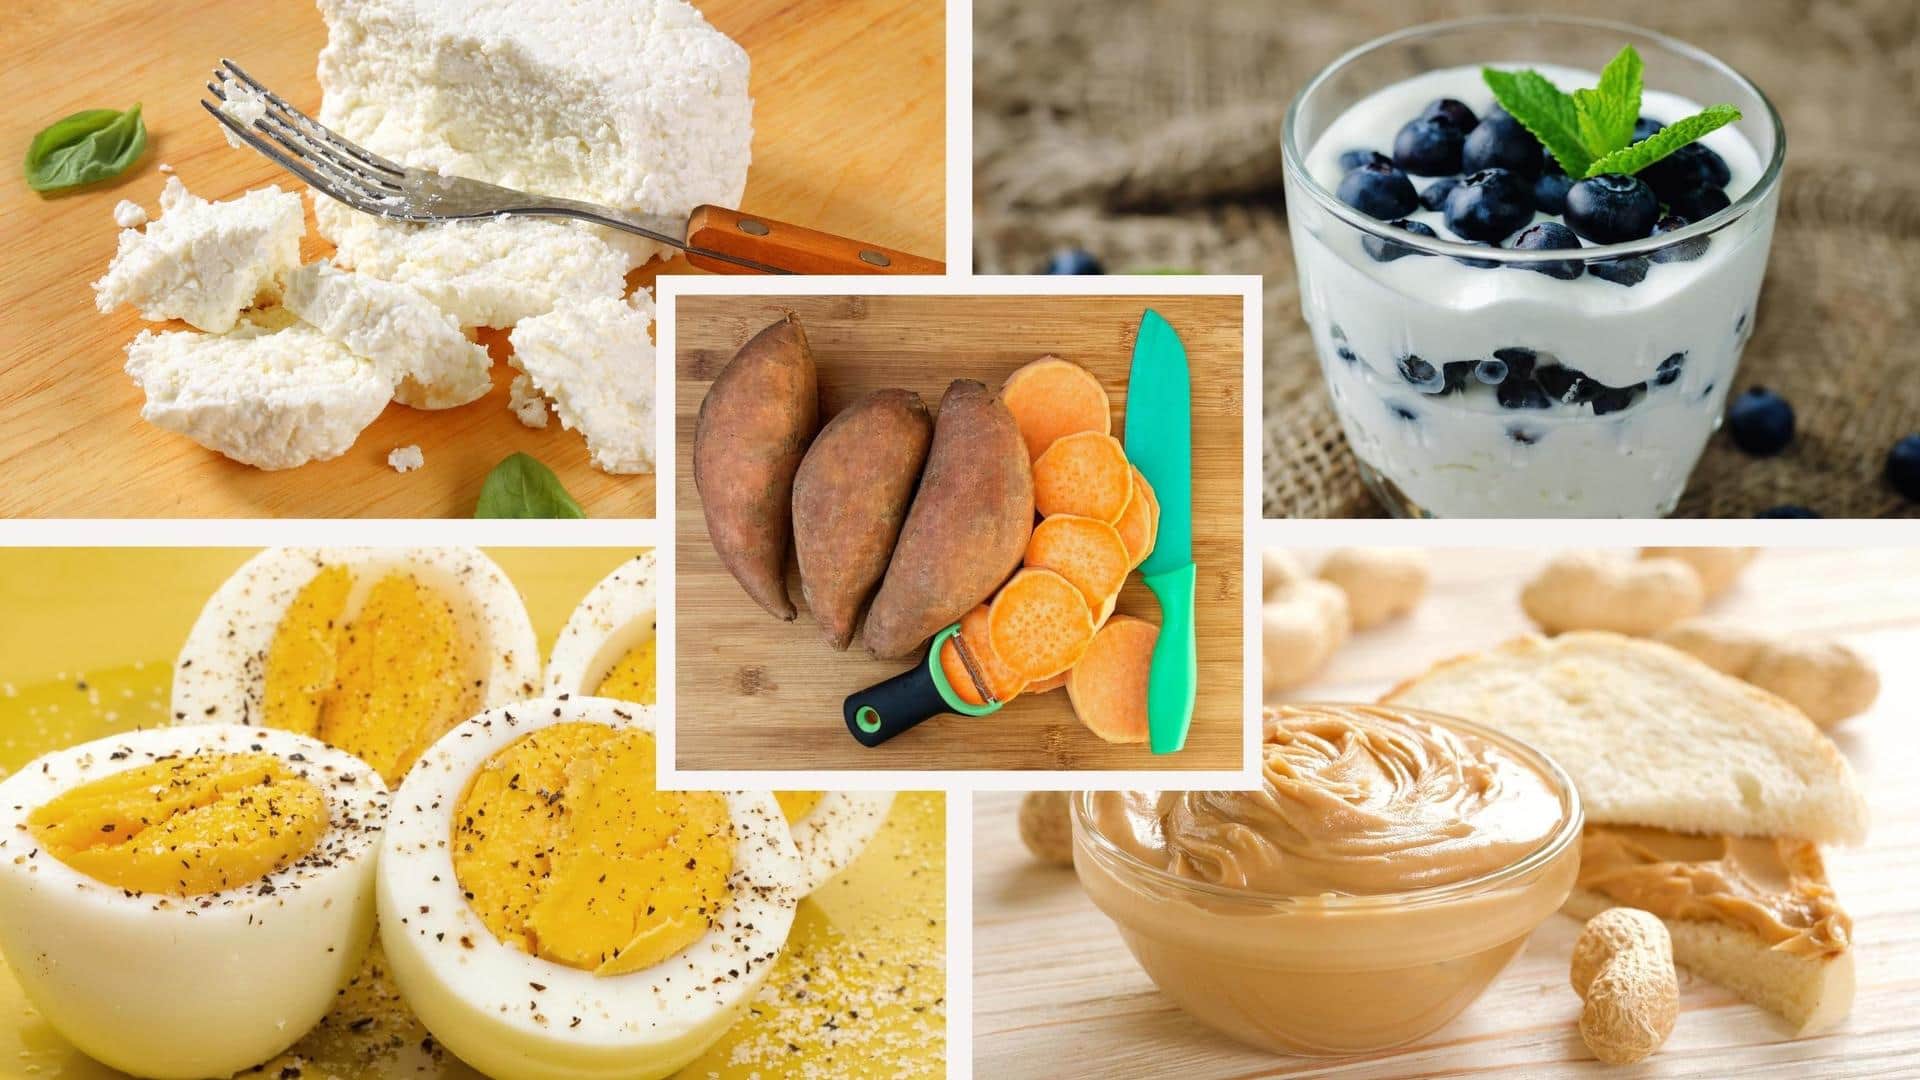 Wondering what to eat after gym? Try these post-workout snacks